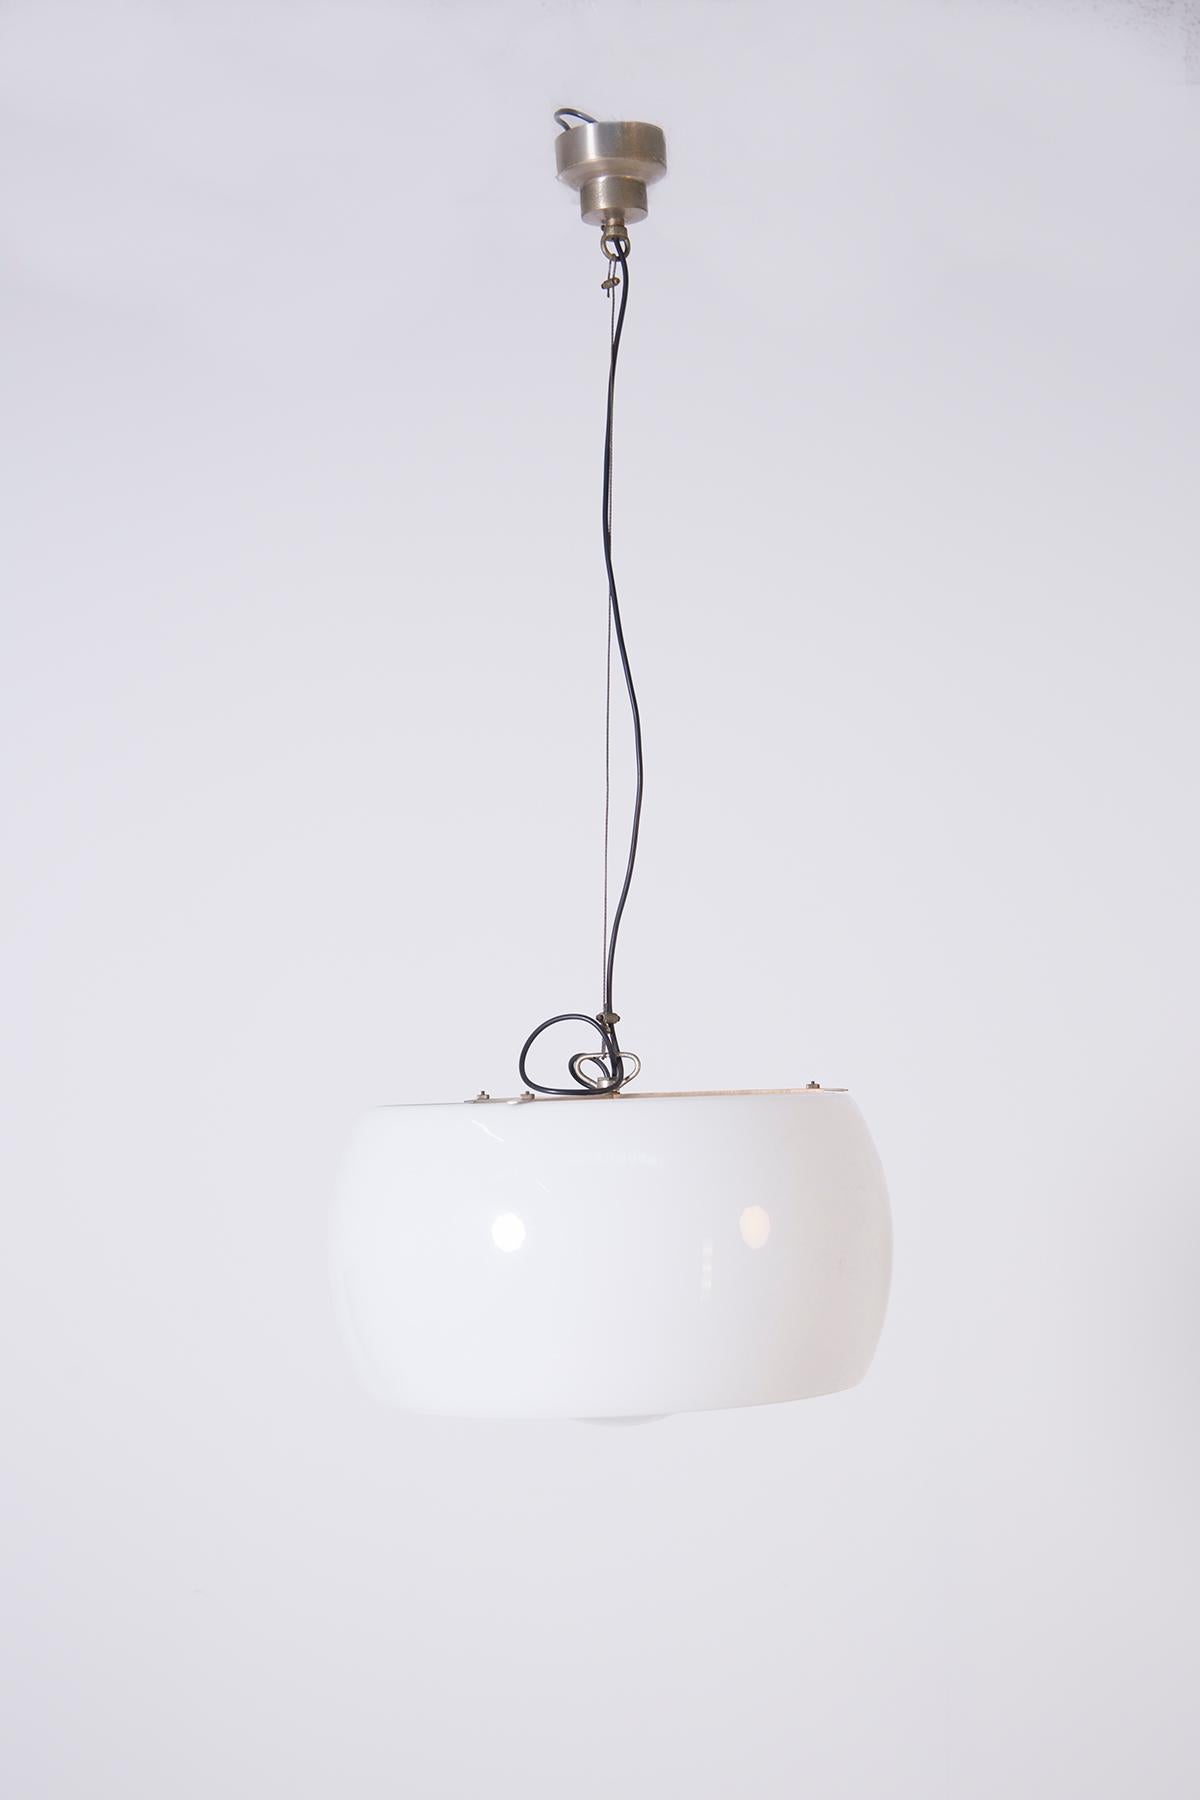 Suspension lamp designed by Vico Magistretti for Artemide, Italy 1962.
The Omega lamp is large in size and consists of two separate pieces of opaline glass on a brushed metal frame. The height of the lamp can be adjusted as required. It mounts an